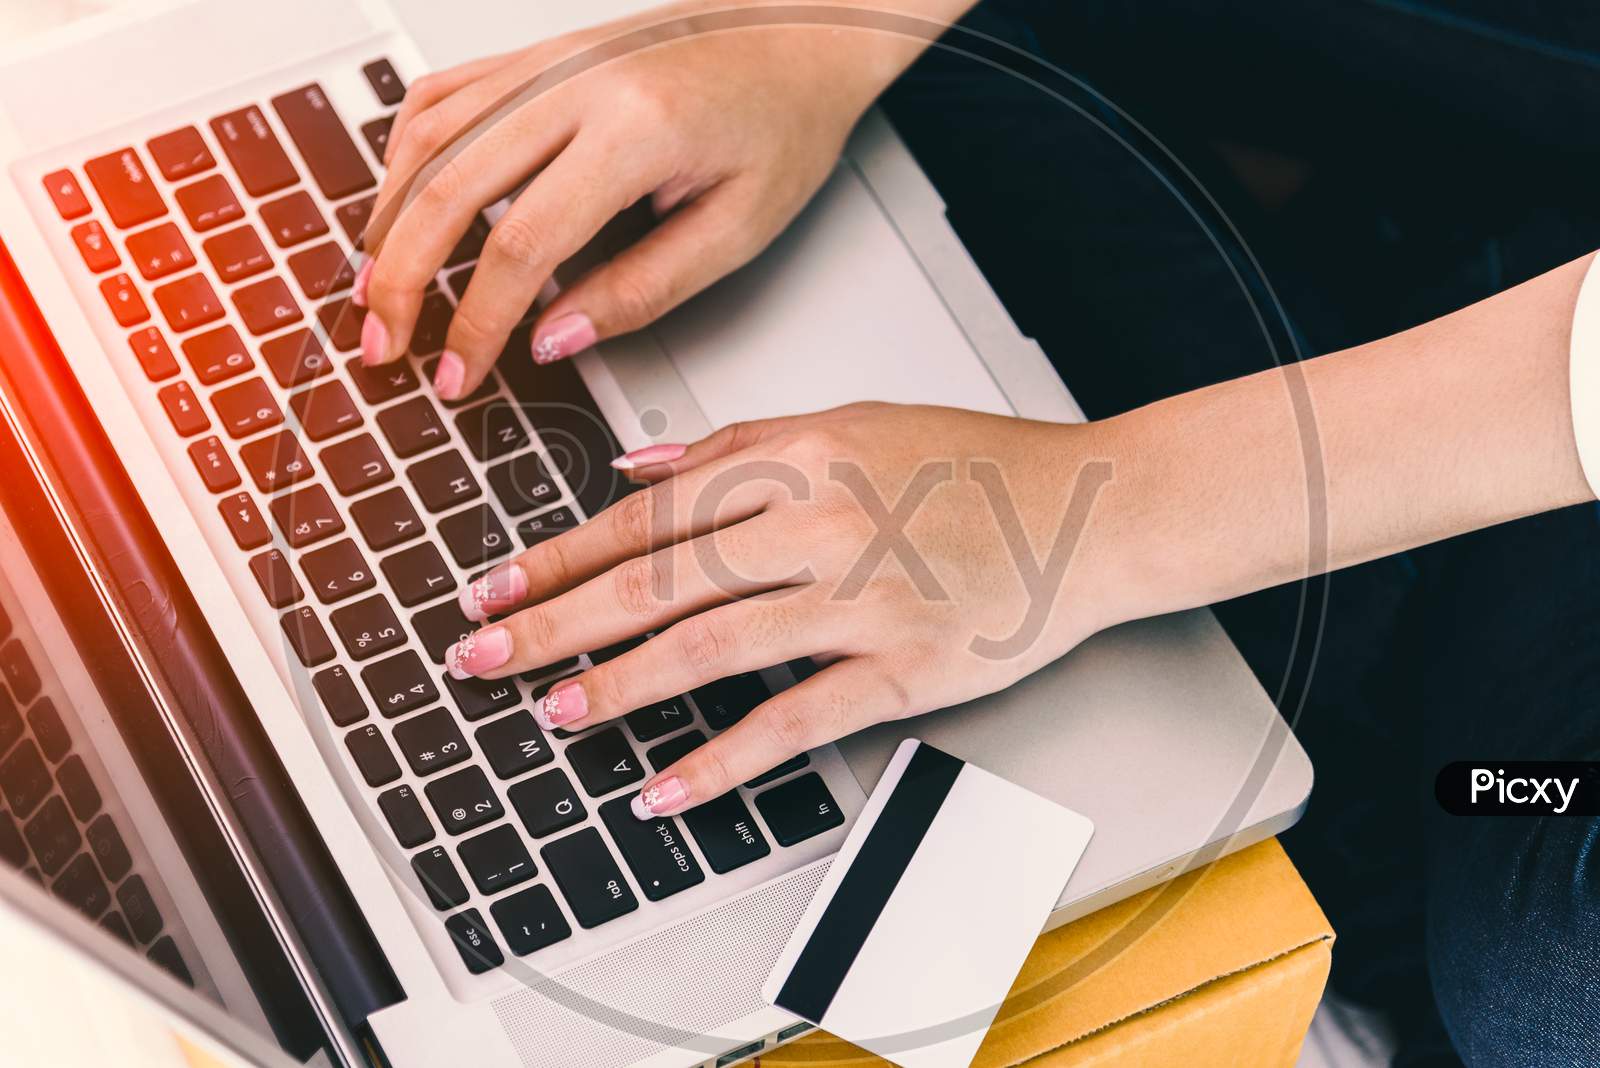 Close Up Of Woman Hands Using Laptop Computer With Credit Card Beside. Technology And Lifestyles Concept. Business Woman Theme.